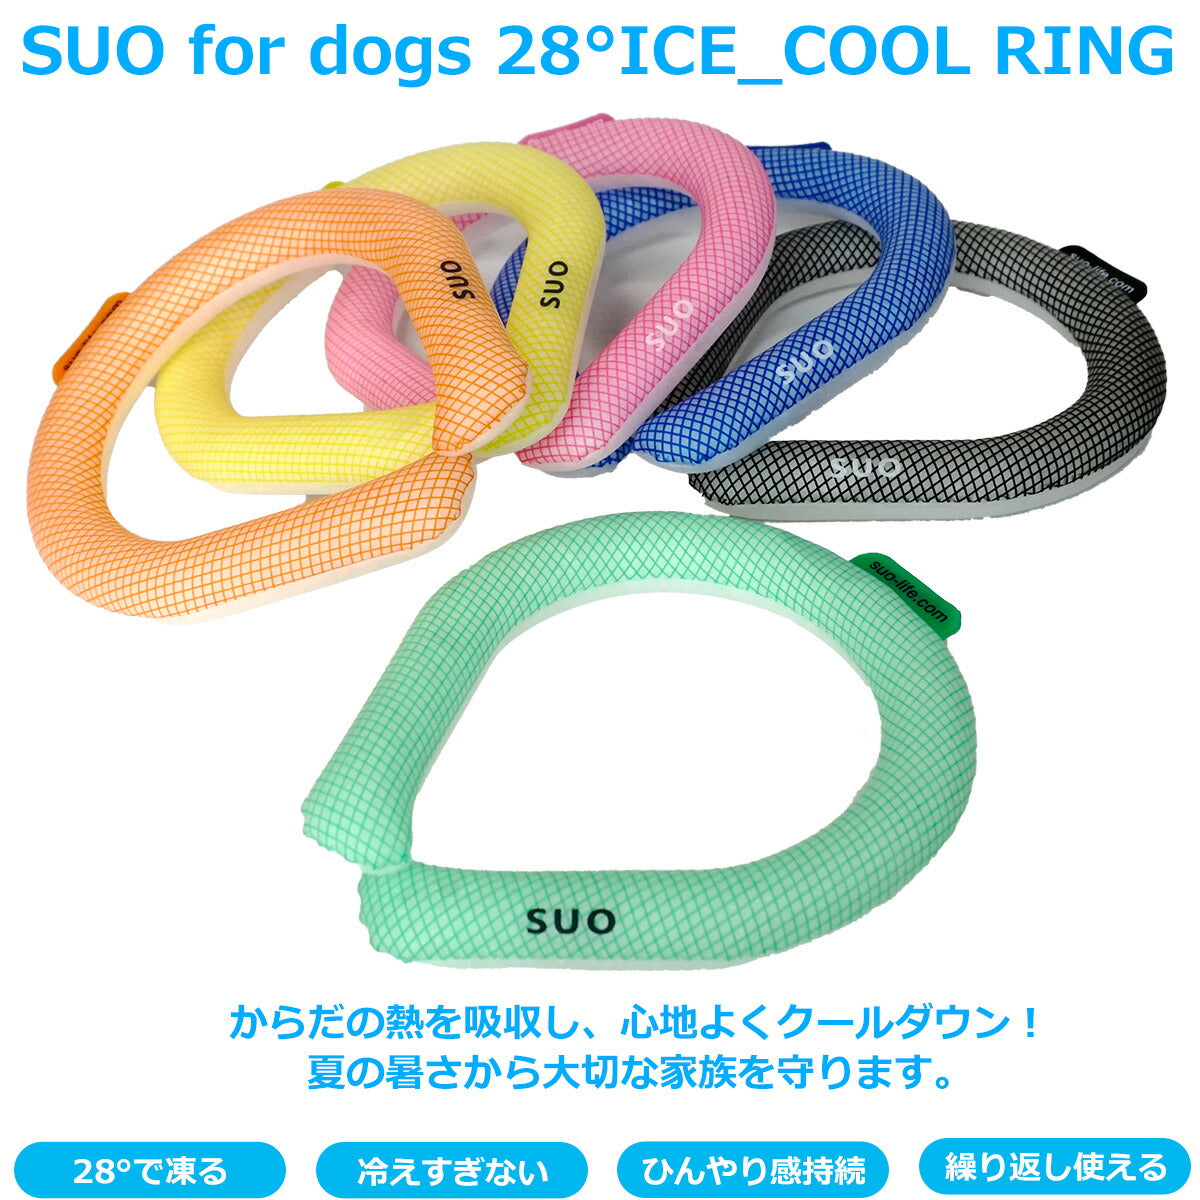 SUO for dogs 28°ICE SUOリング ボタンなし L ピンク 熱中症対策グッズ 暑さ対策 ひんやり 首 冷感 犬 大人 子供